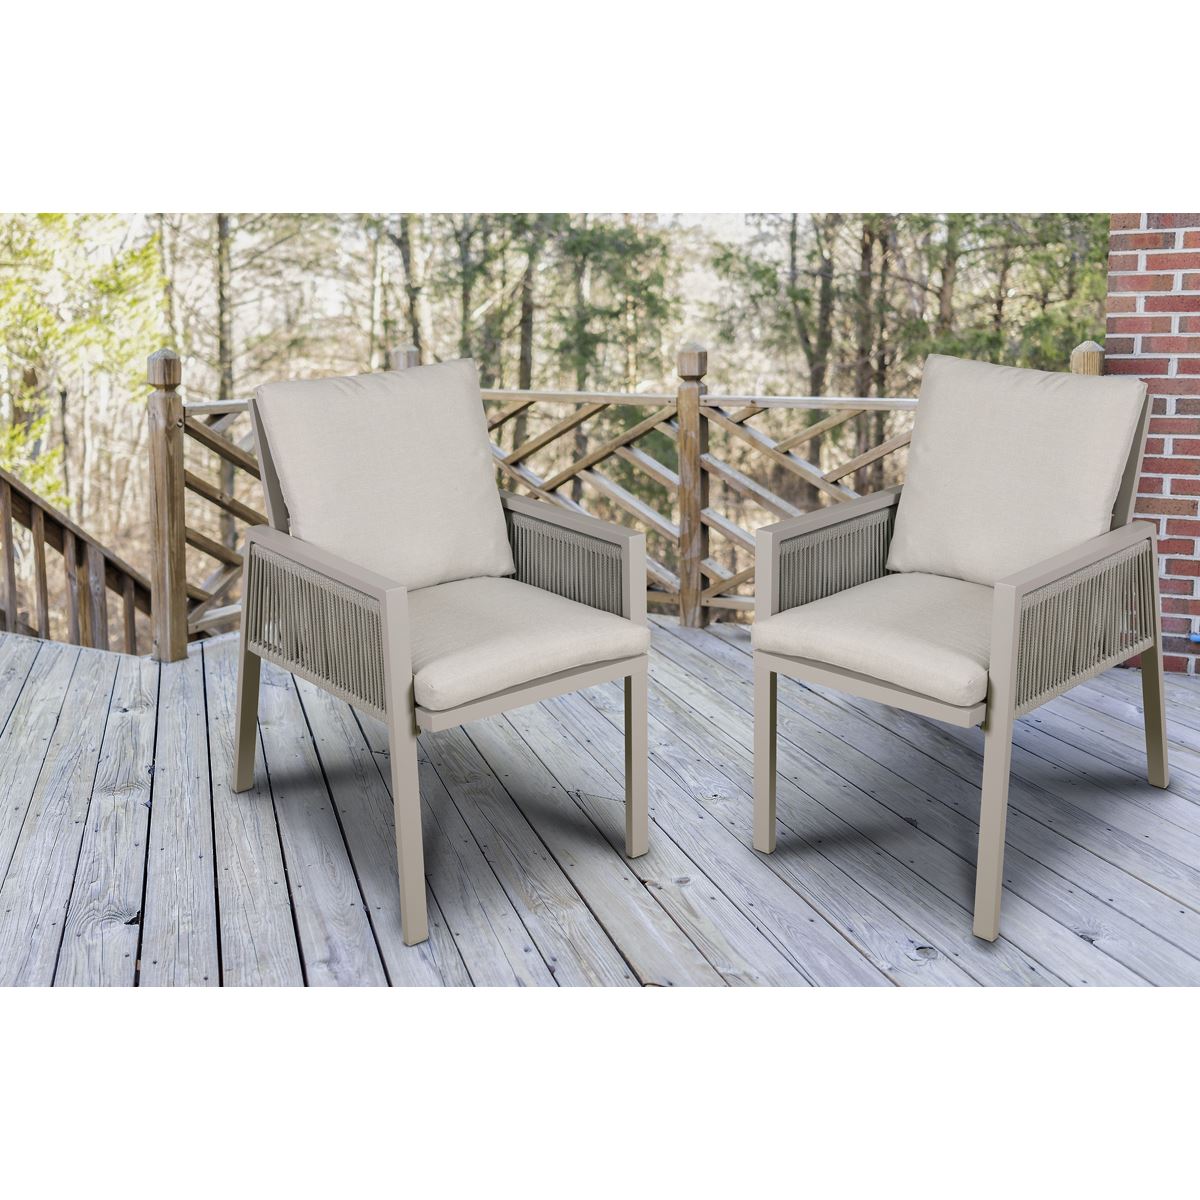 Dellonda Fusion Garden/Patio Dining Chair with Armrests, Set of 6, Light Grey - DG49